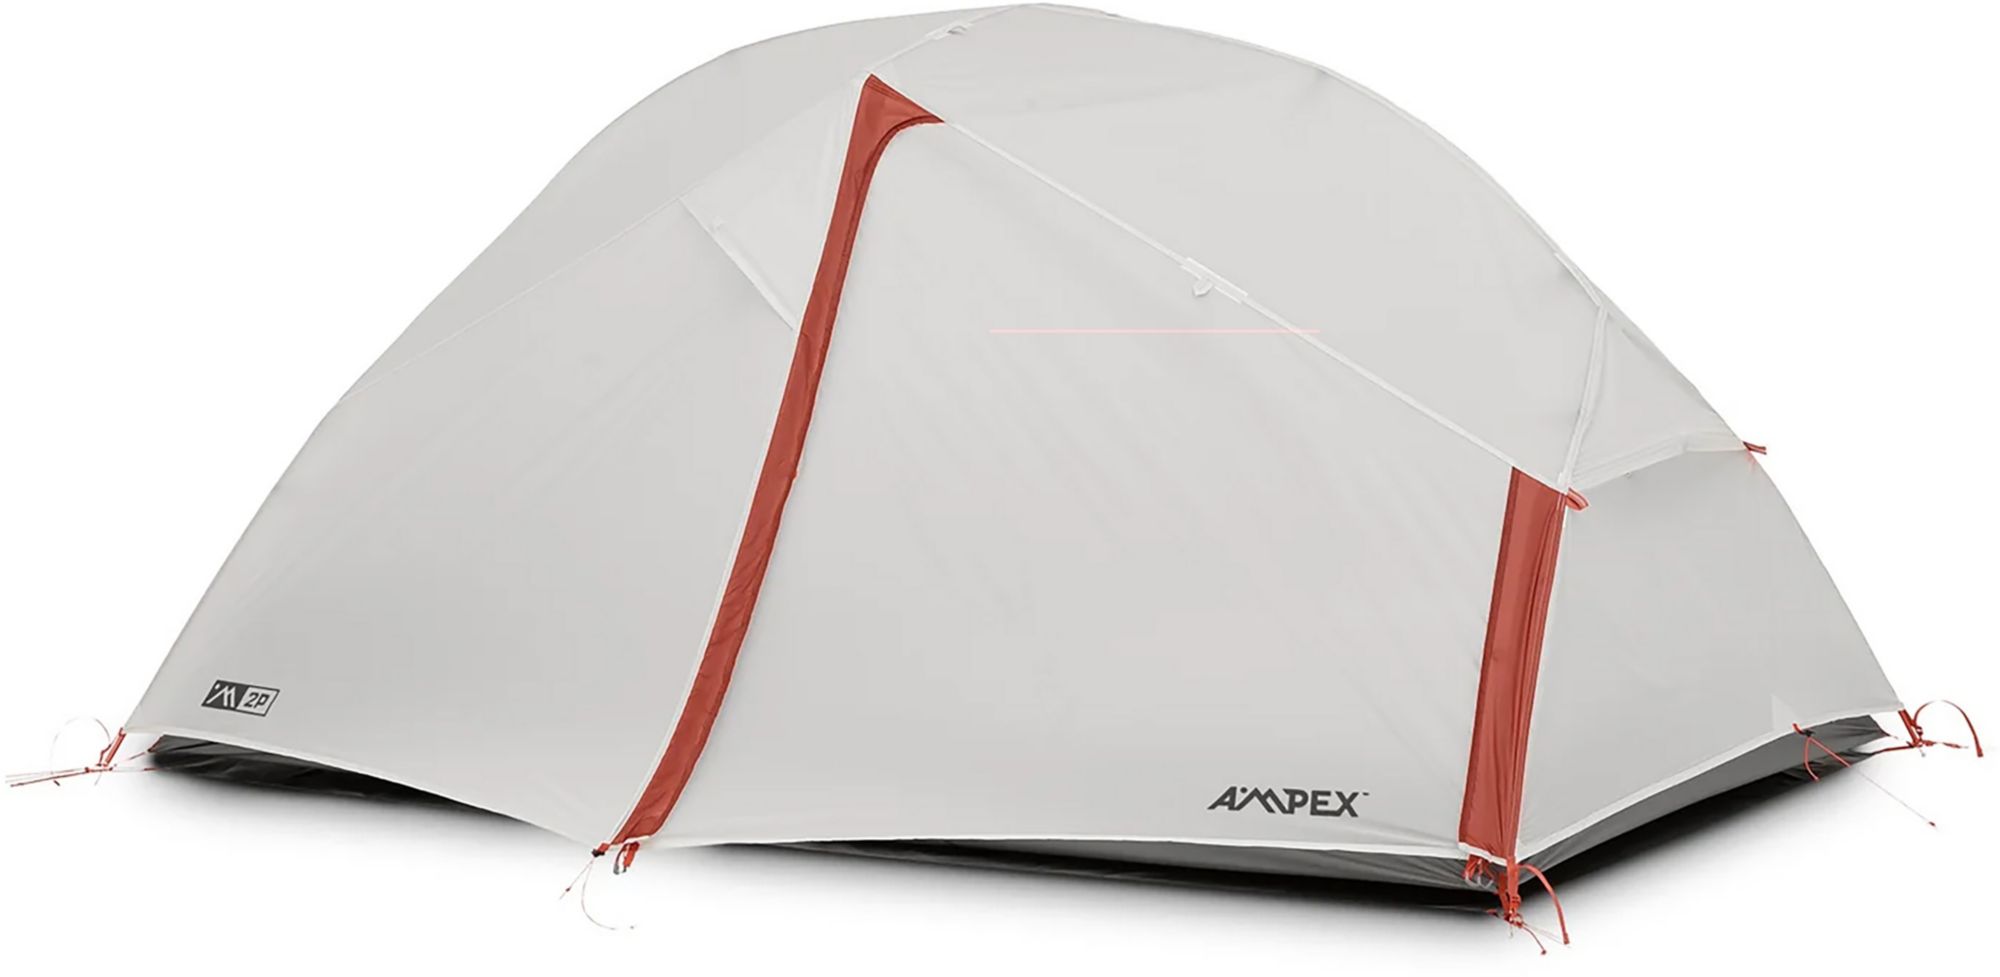 Photos - Tent AMPEX Codazzi 2 Person Backpacking , White/Red/Grey 23RDWU2PBCKPCKNGTC